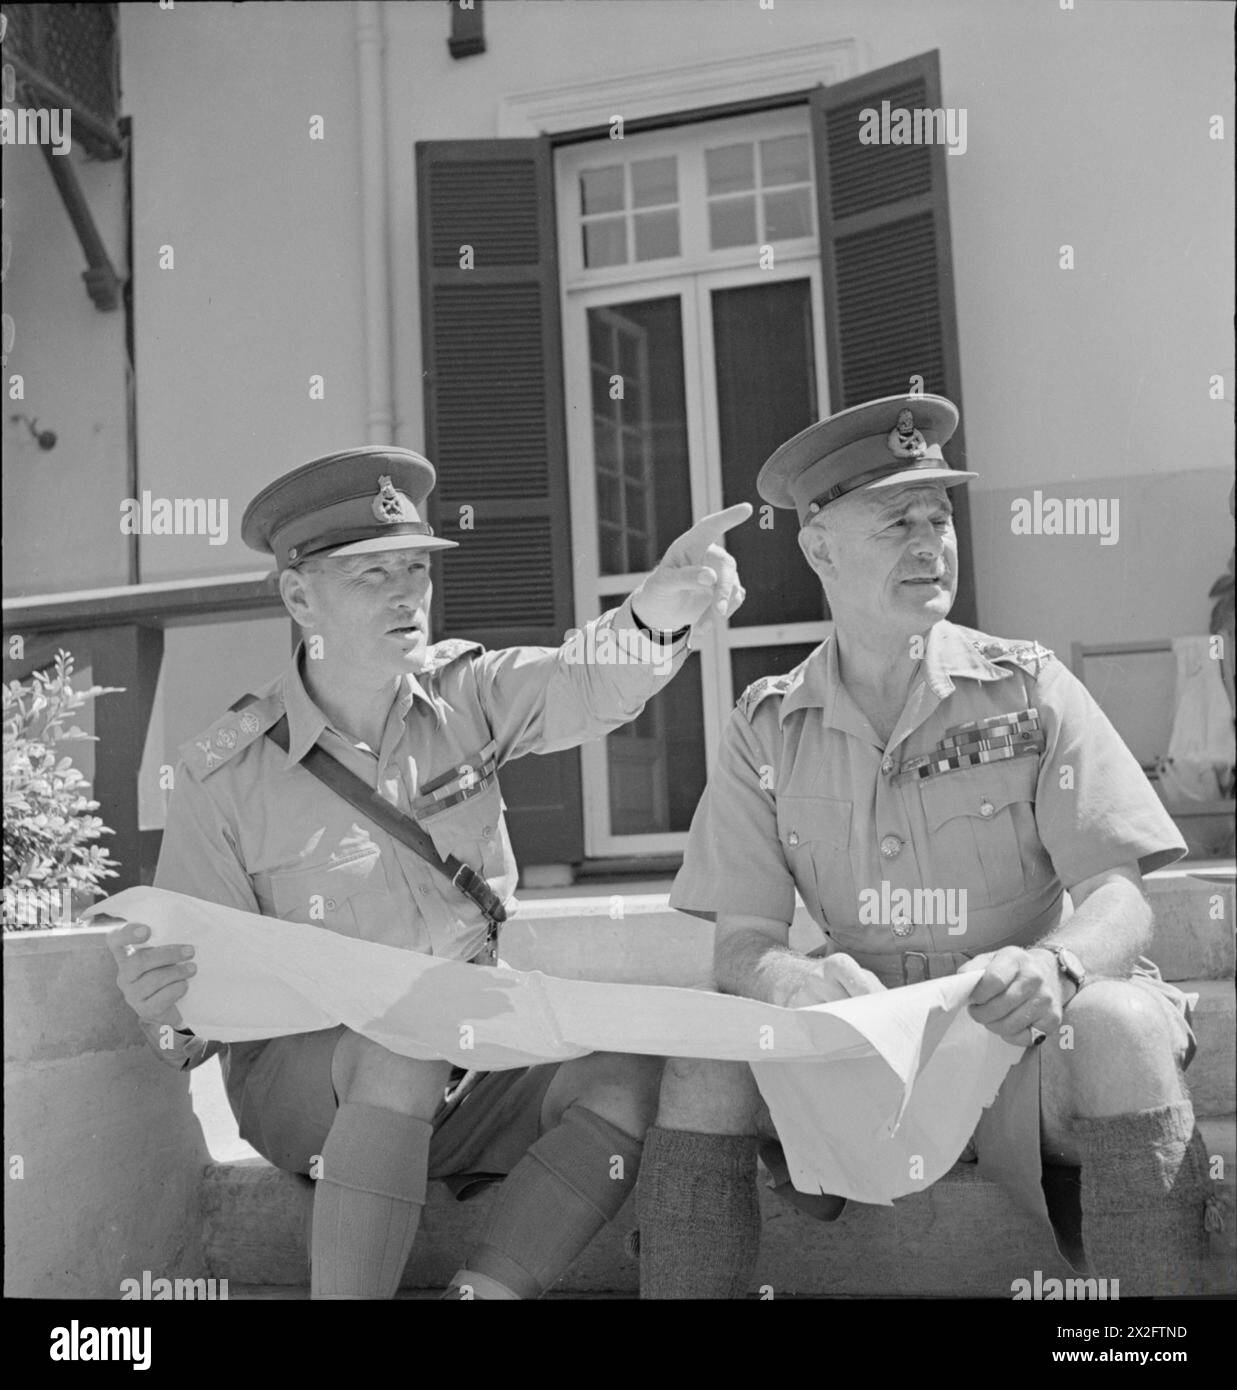 THE BRITISH ARMY IN THE MIDDLE EAST 1941 - General Sir Archibald Wavell, Commander-in-Chief for India and General Sir Claude Auchinleck, Commander-in-Chief for the Middle East, 8 September 1941 Stock Photo